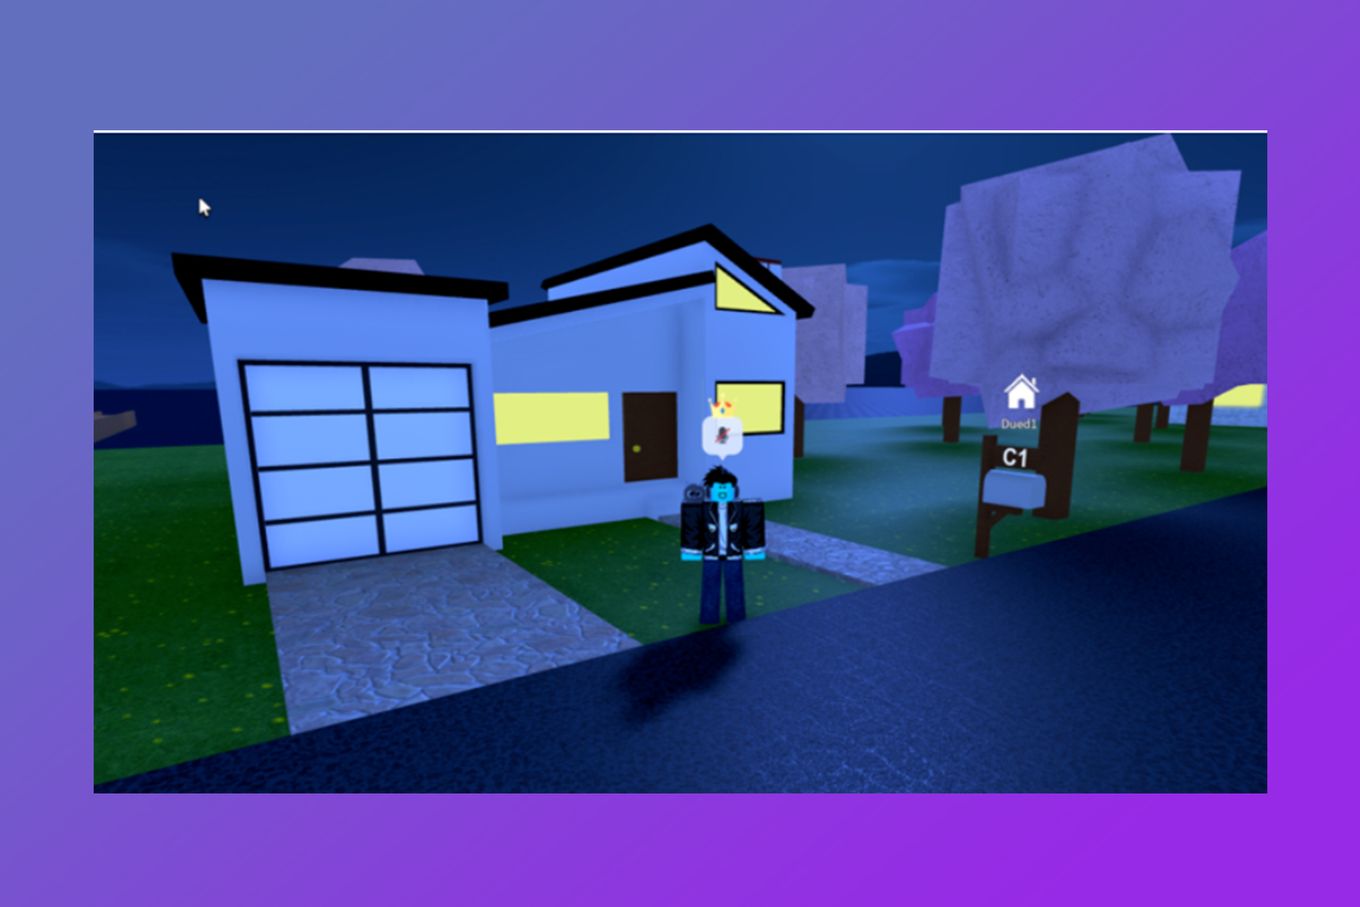 Oldest Roblox Games - Pizza Place